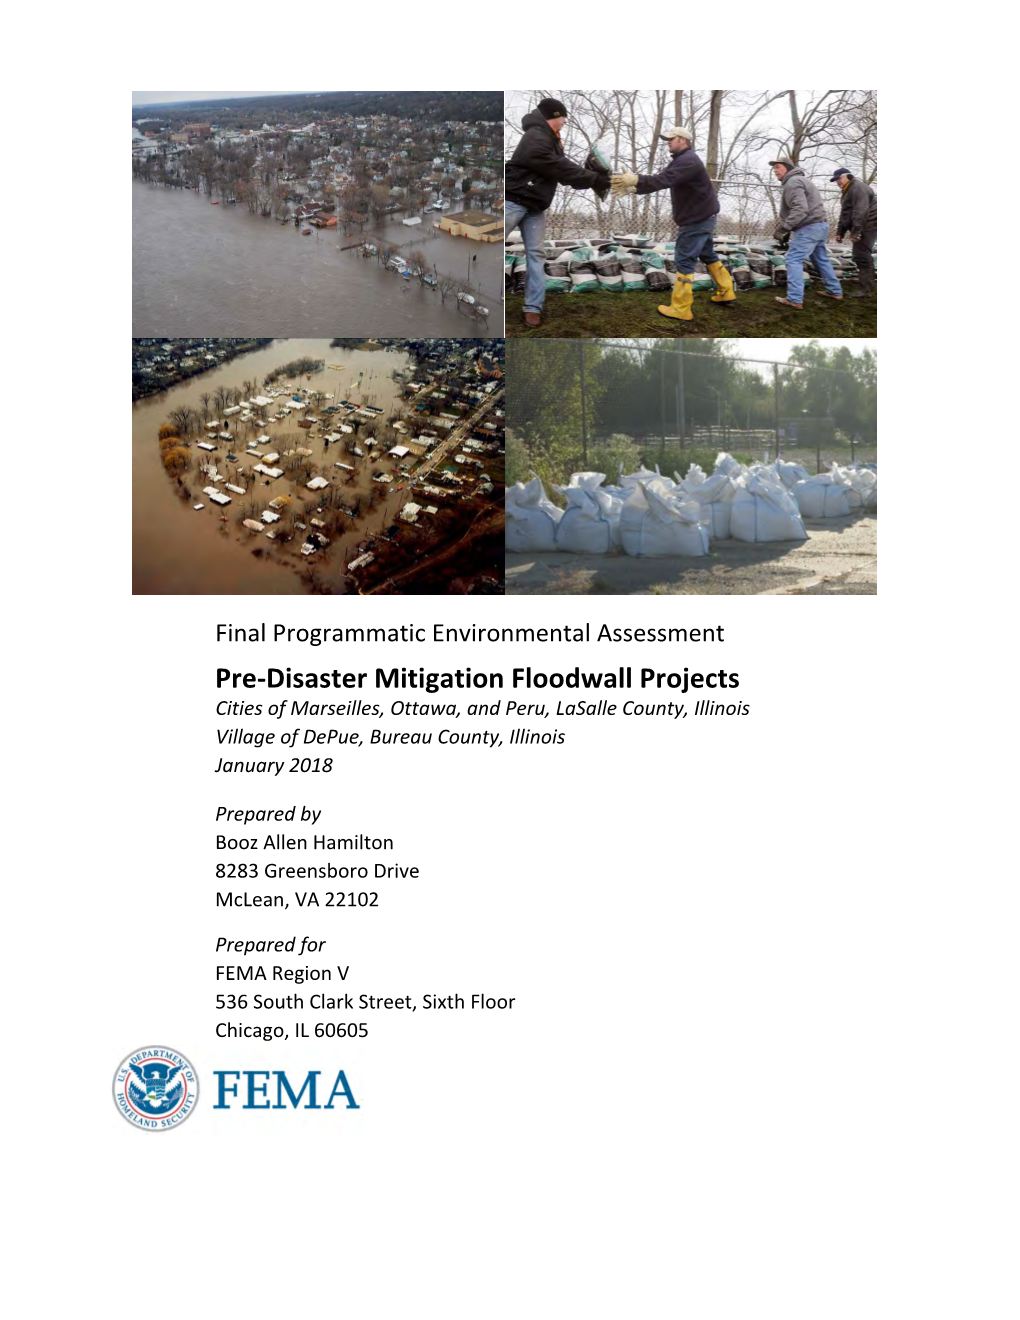 Pre-Disaster Mitigation Floodwall Projects Cities of Marseilles, Ottawa, and Peru, Lasalle County, Illinois Village of Depue, Bureau County, Illinois January 2018